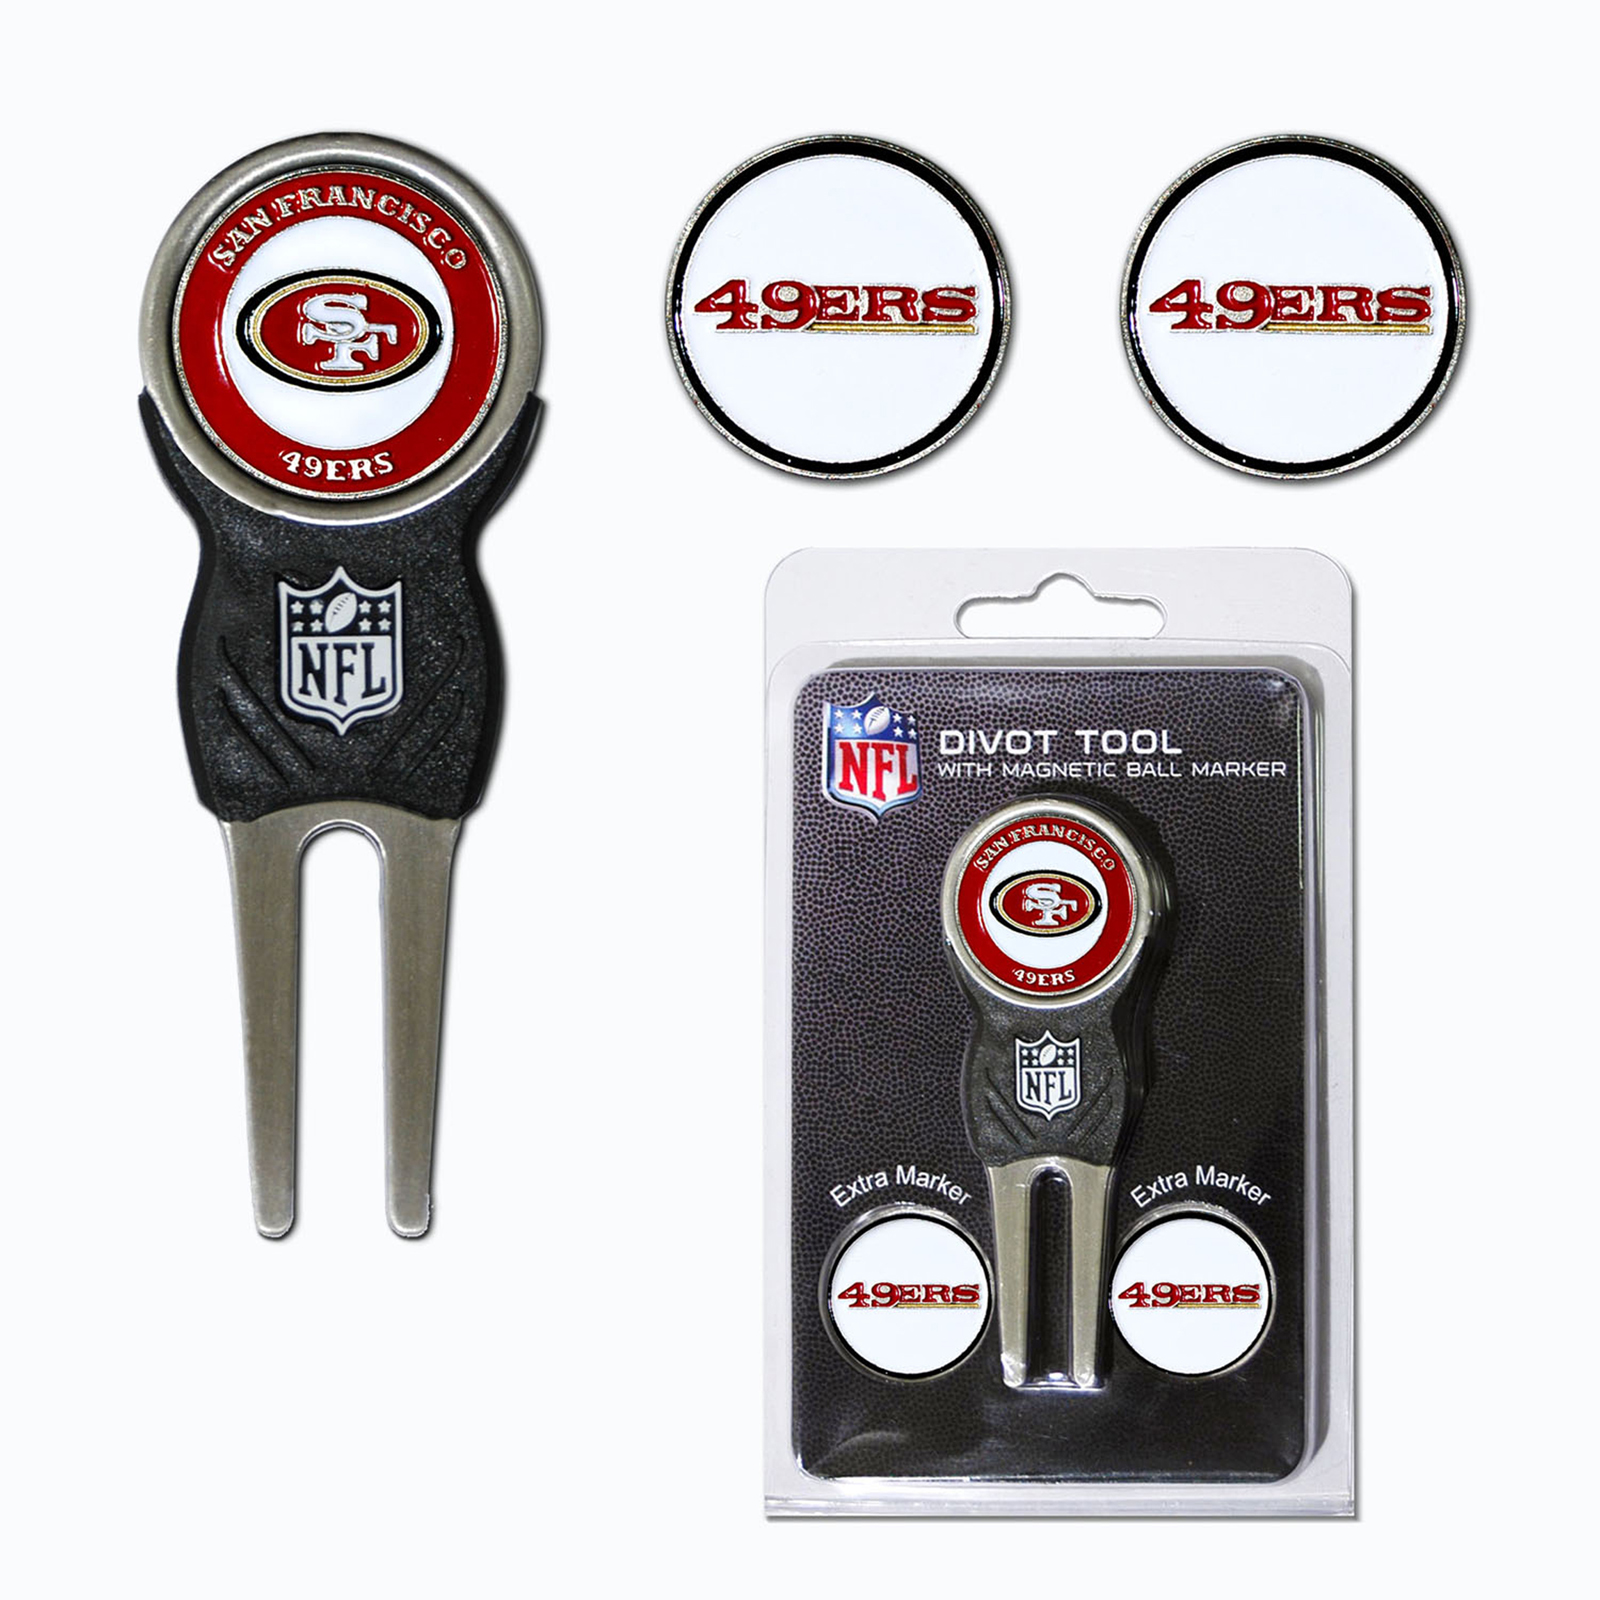 0637556327451 - SAN FRANCISCO 49ERS DIVOT TOOL PACK WITH SIGNATURE TOOL